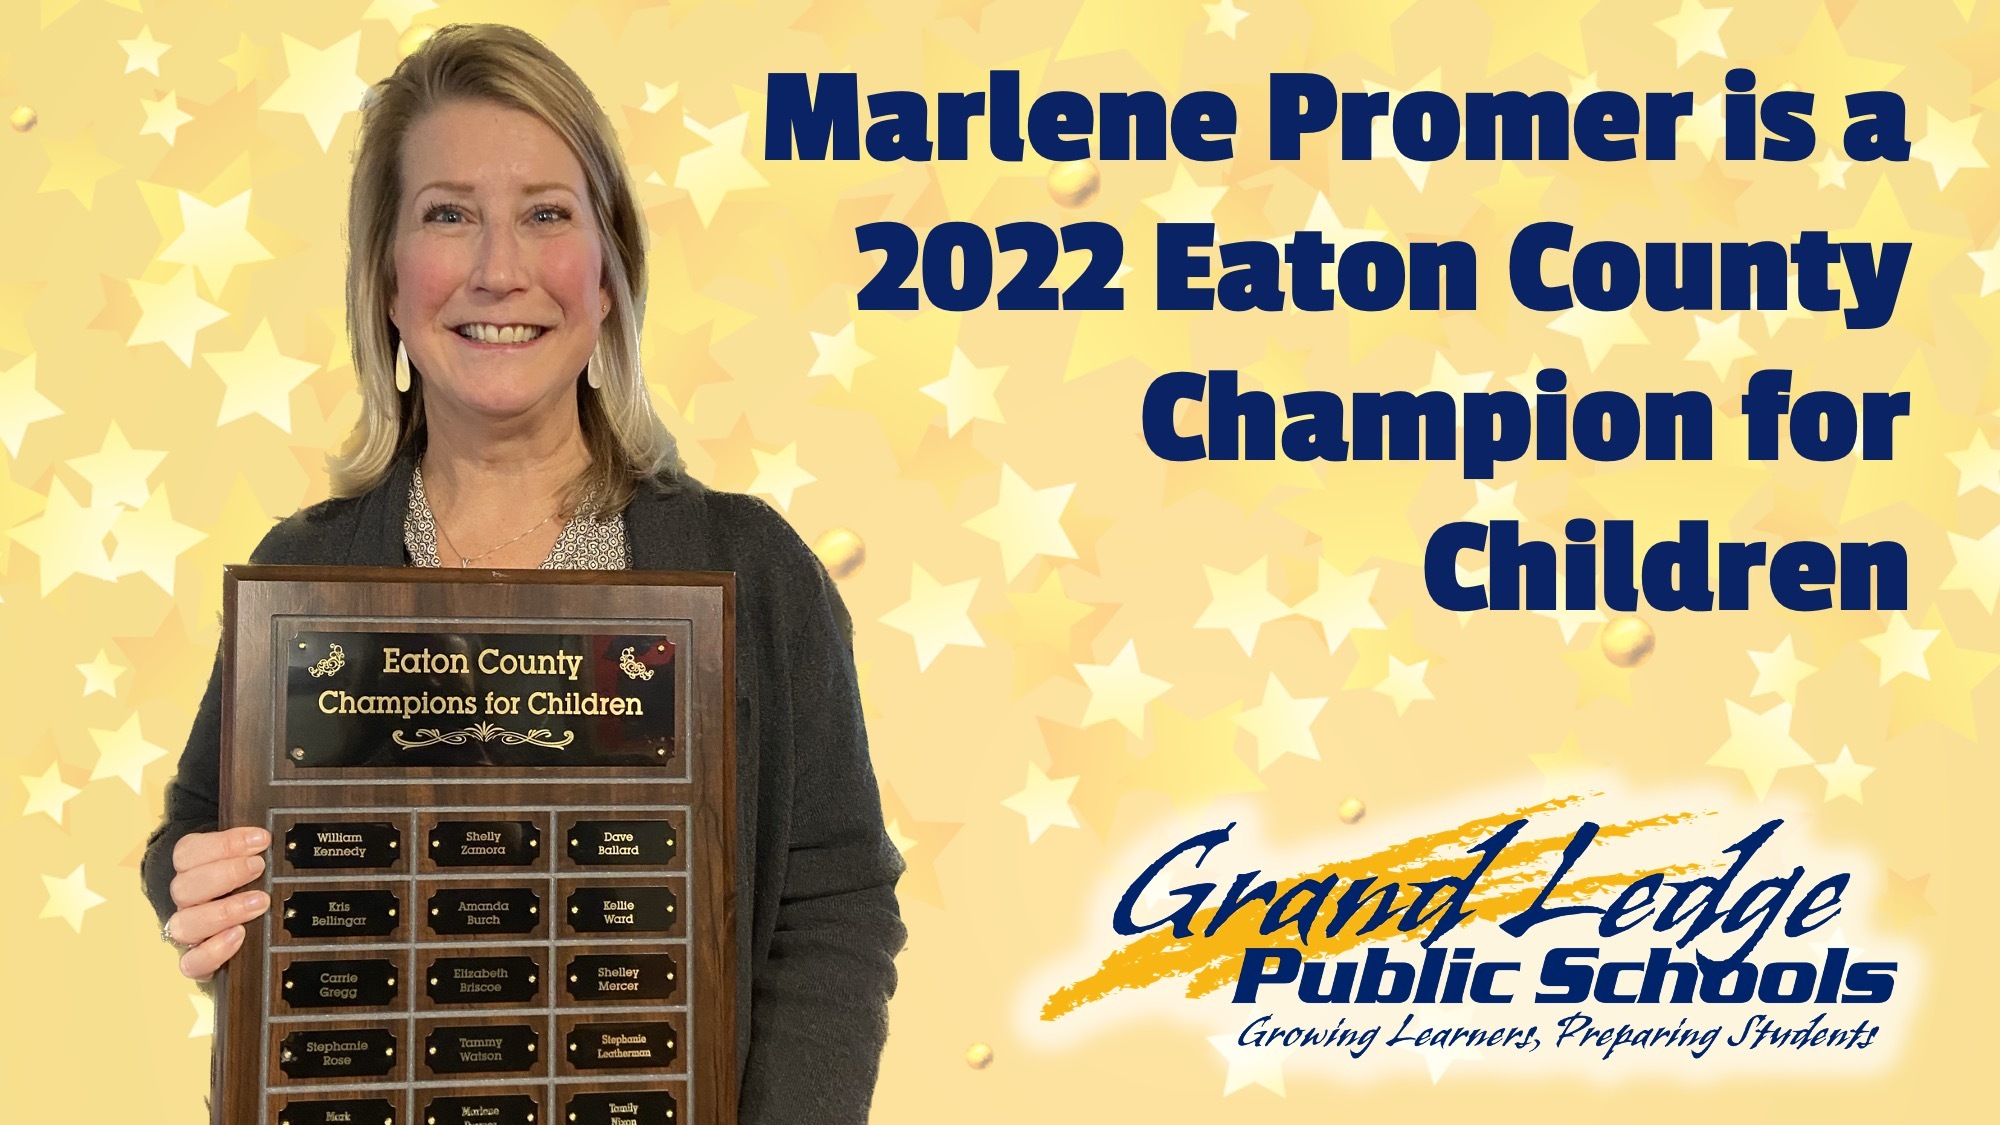 Marlene Promer is a 2022 Eaton County Champion for Children